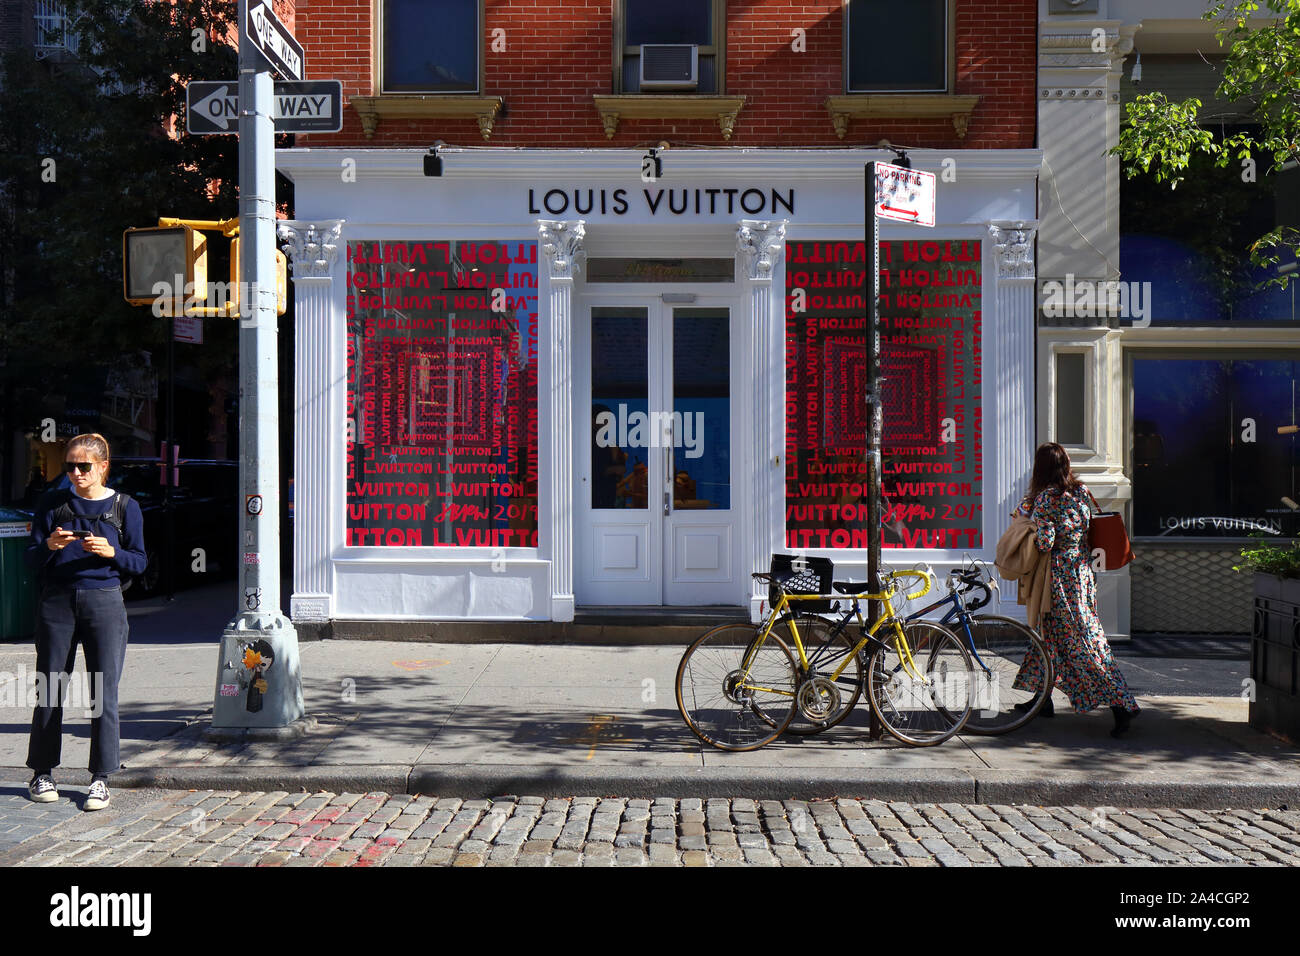 Louis Vuitton, 116 Greene Street, New York, NY. exterior storefront of a french luxury goods store in the SoHo neighborhood of Manhattan. Stock Photo